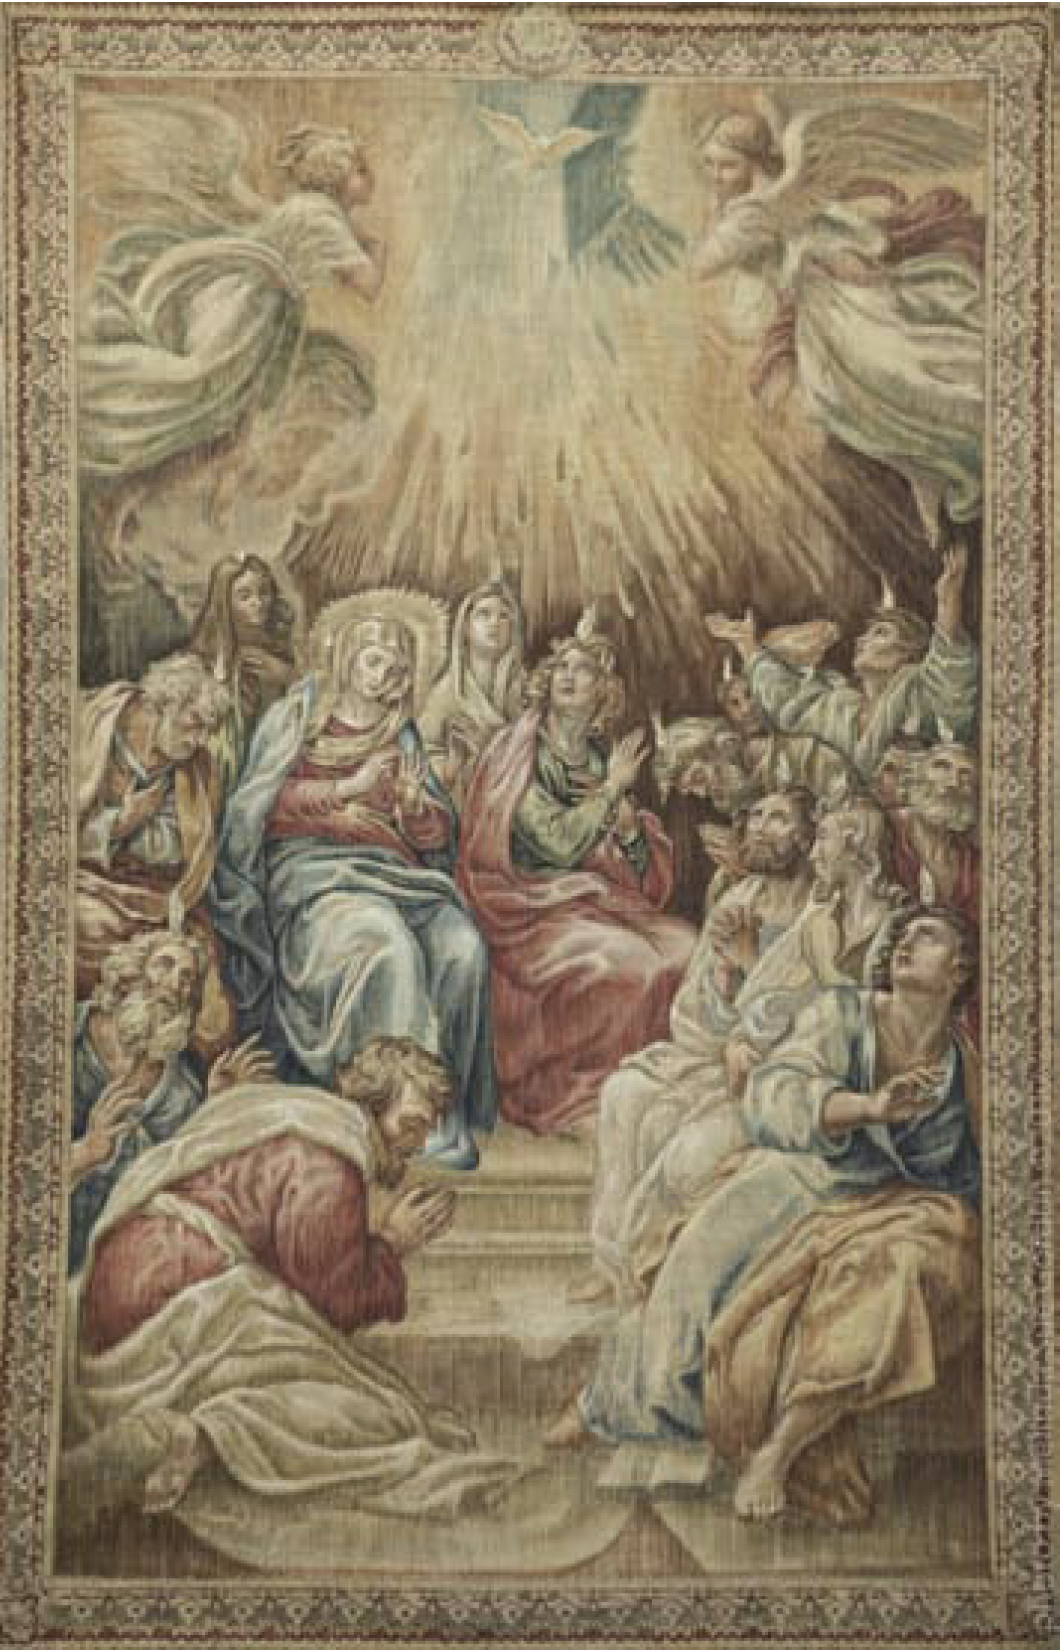 'Tapestry depicting The Pentecost' backdrop from The Shoes of the Fisherman